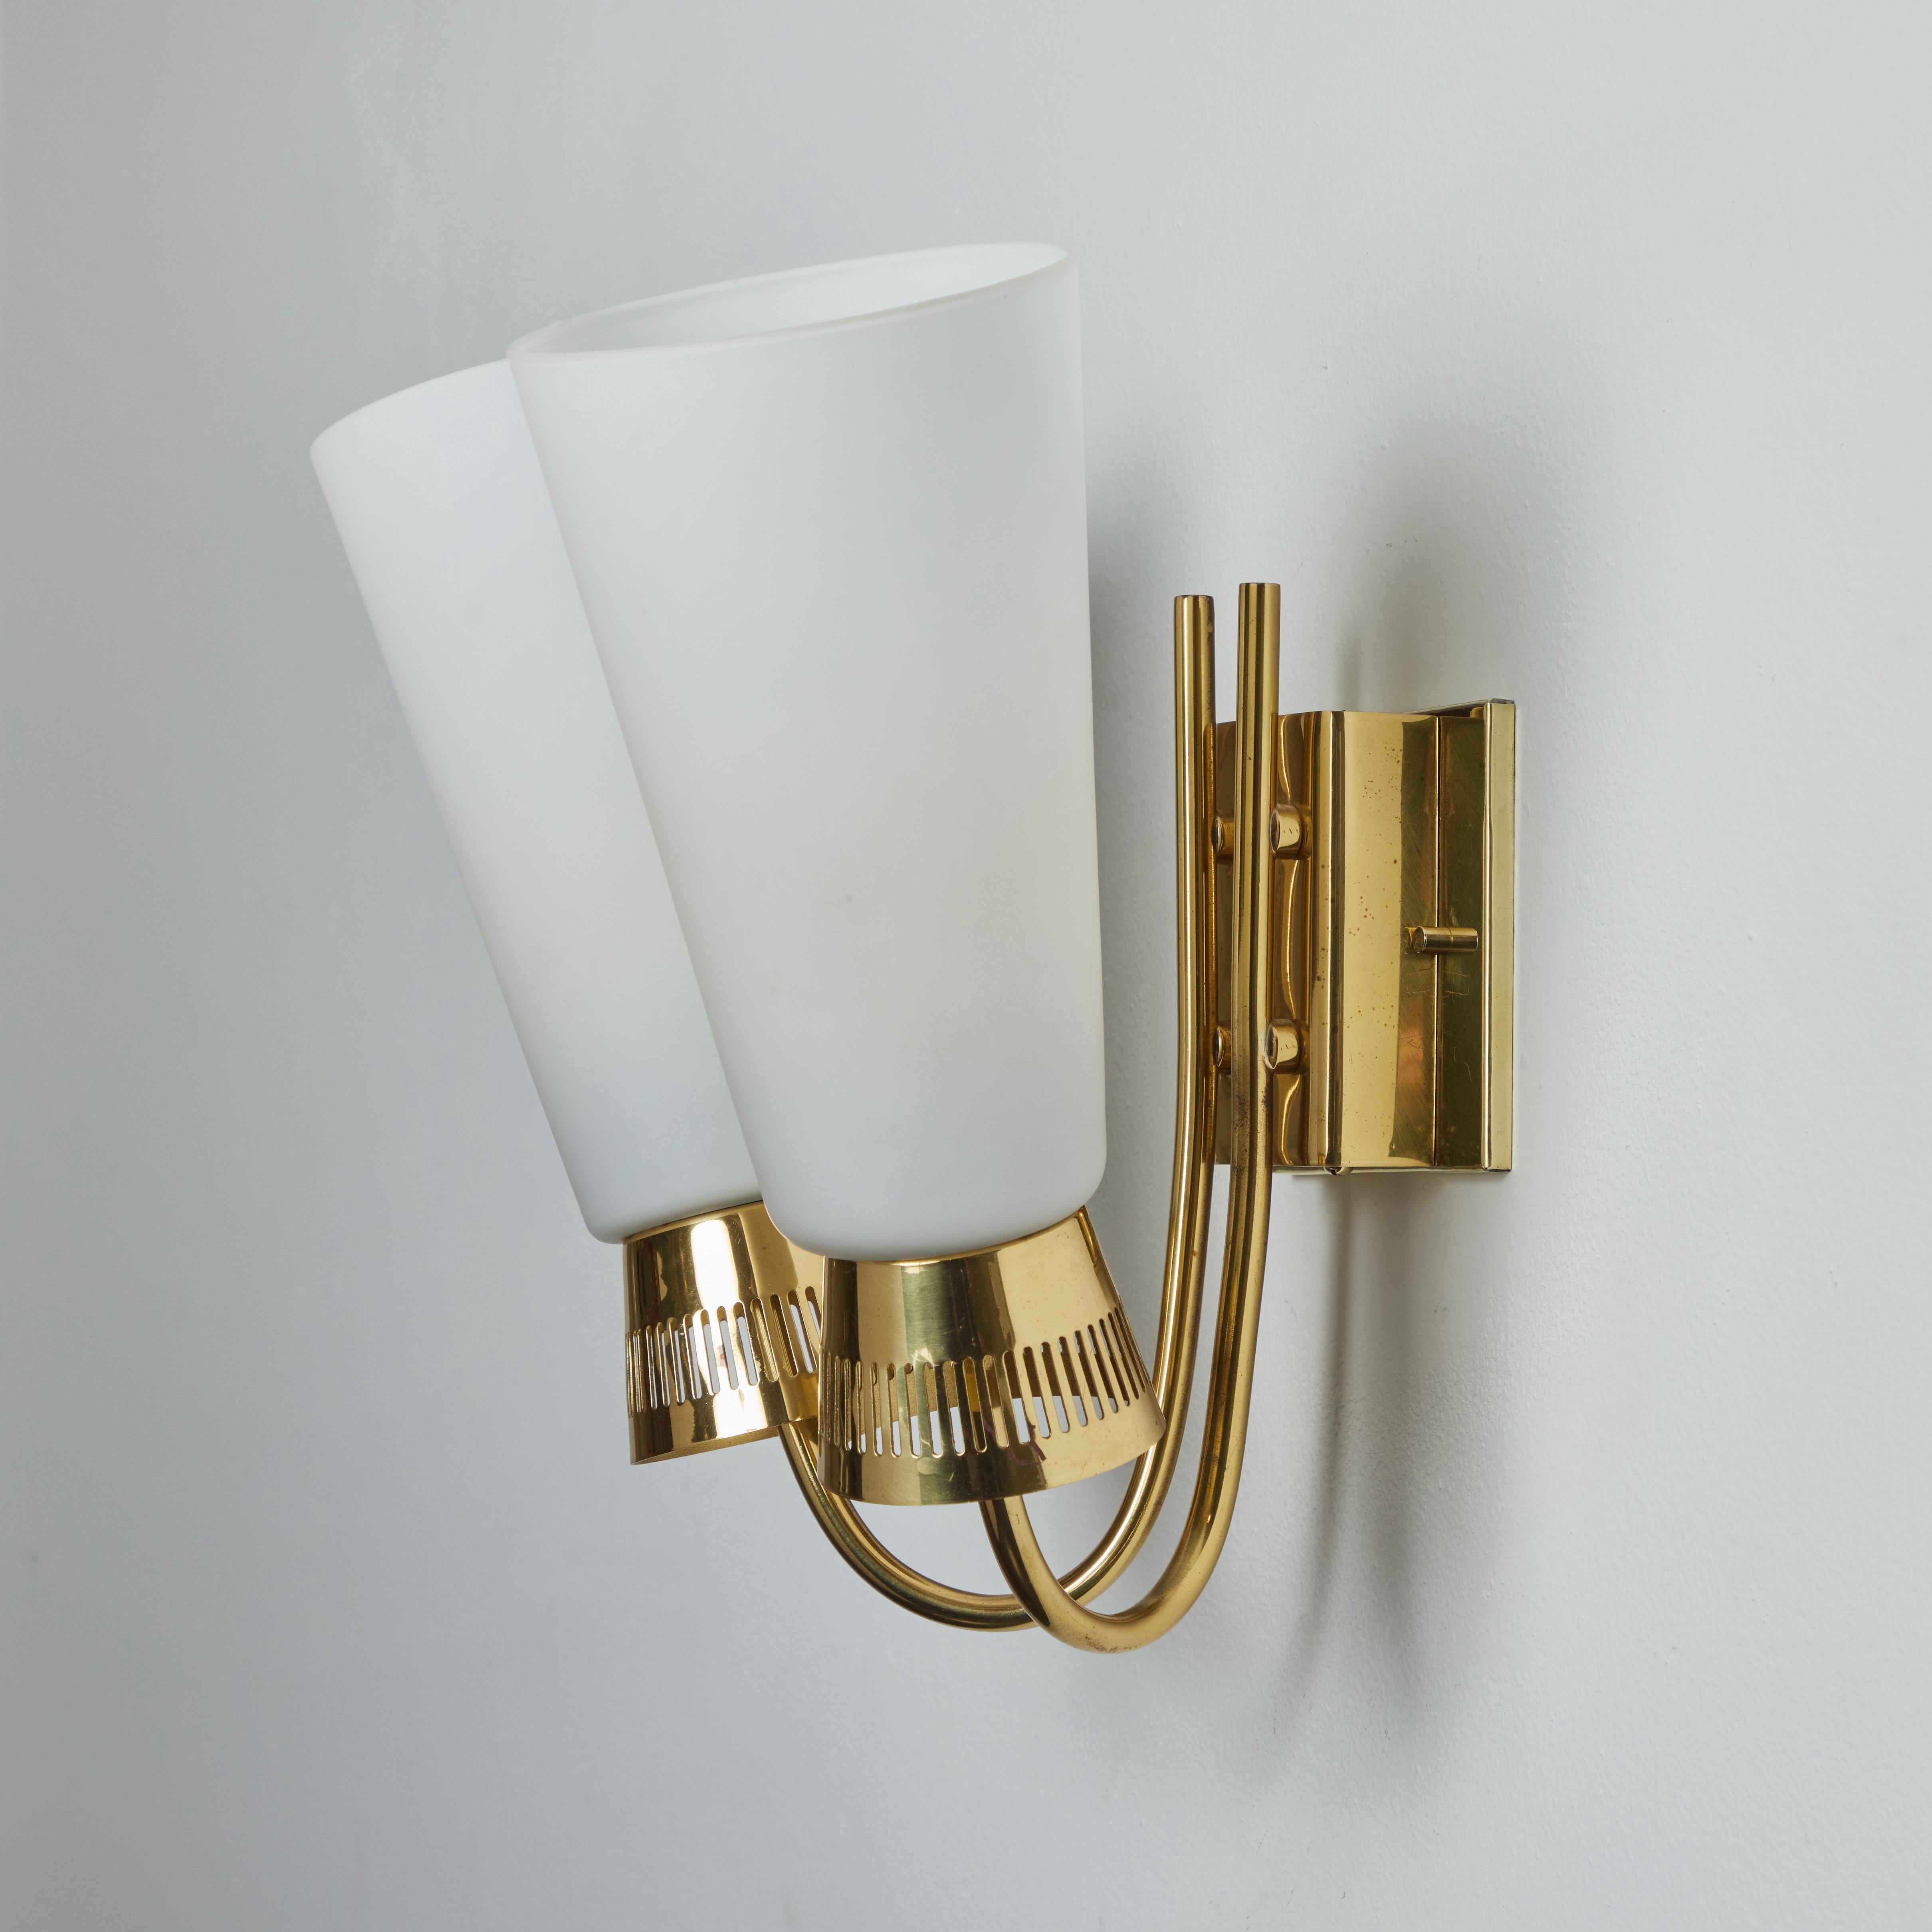 Pair of 1950s Mauri Almari Model #EY60 Brass & Glass Double Sconces for Itsu For Sale 4